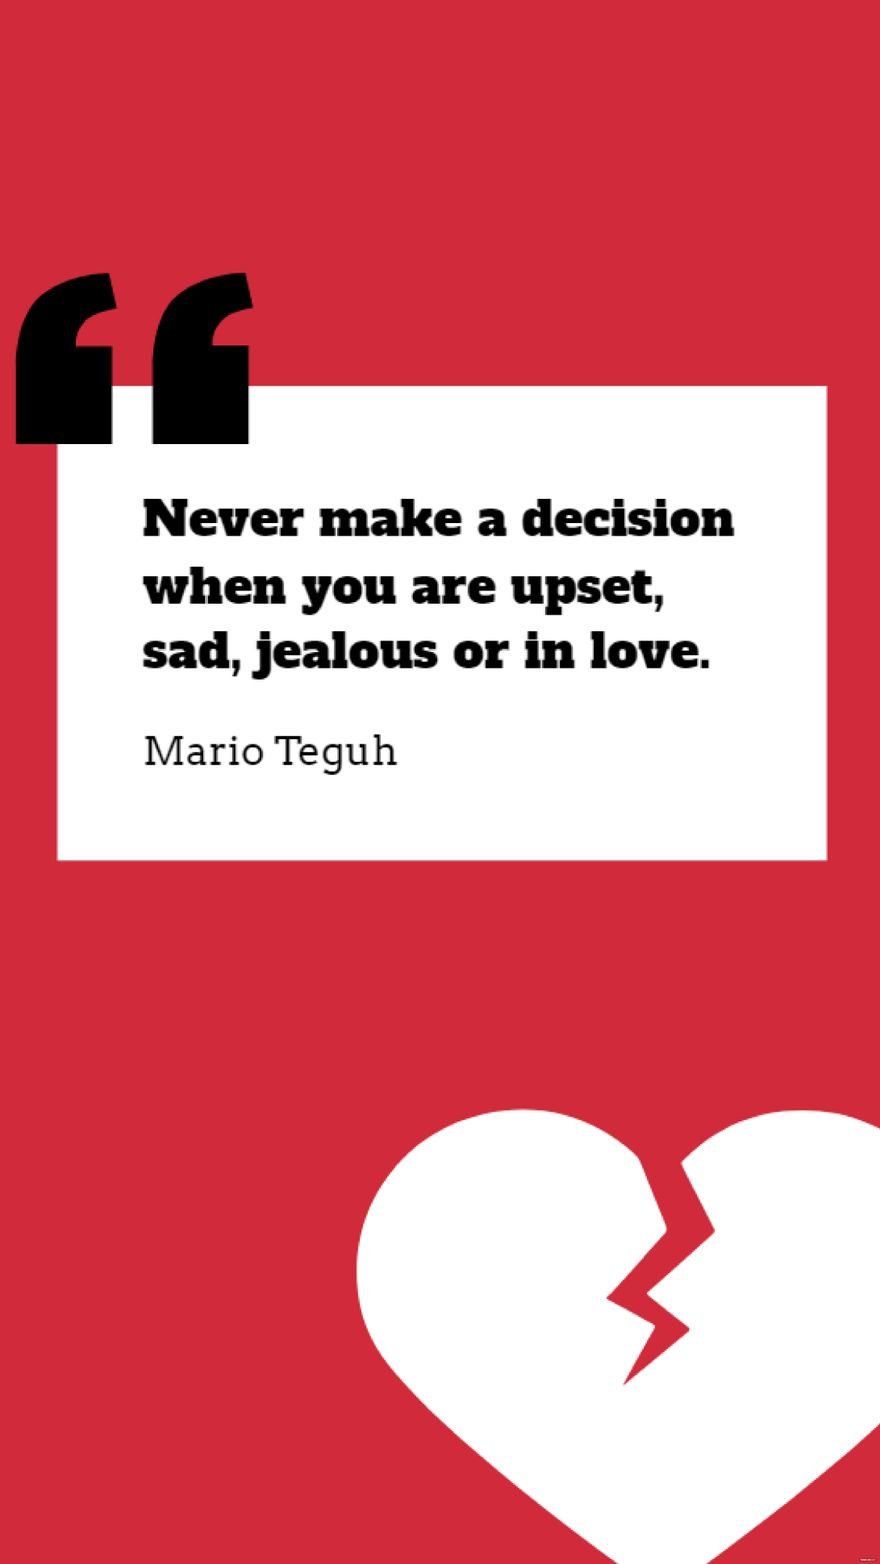 Mario Teguh - Never make a decision when you are upset, sad, jealous or in love.